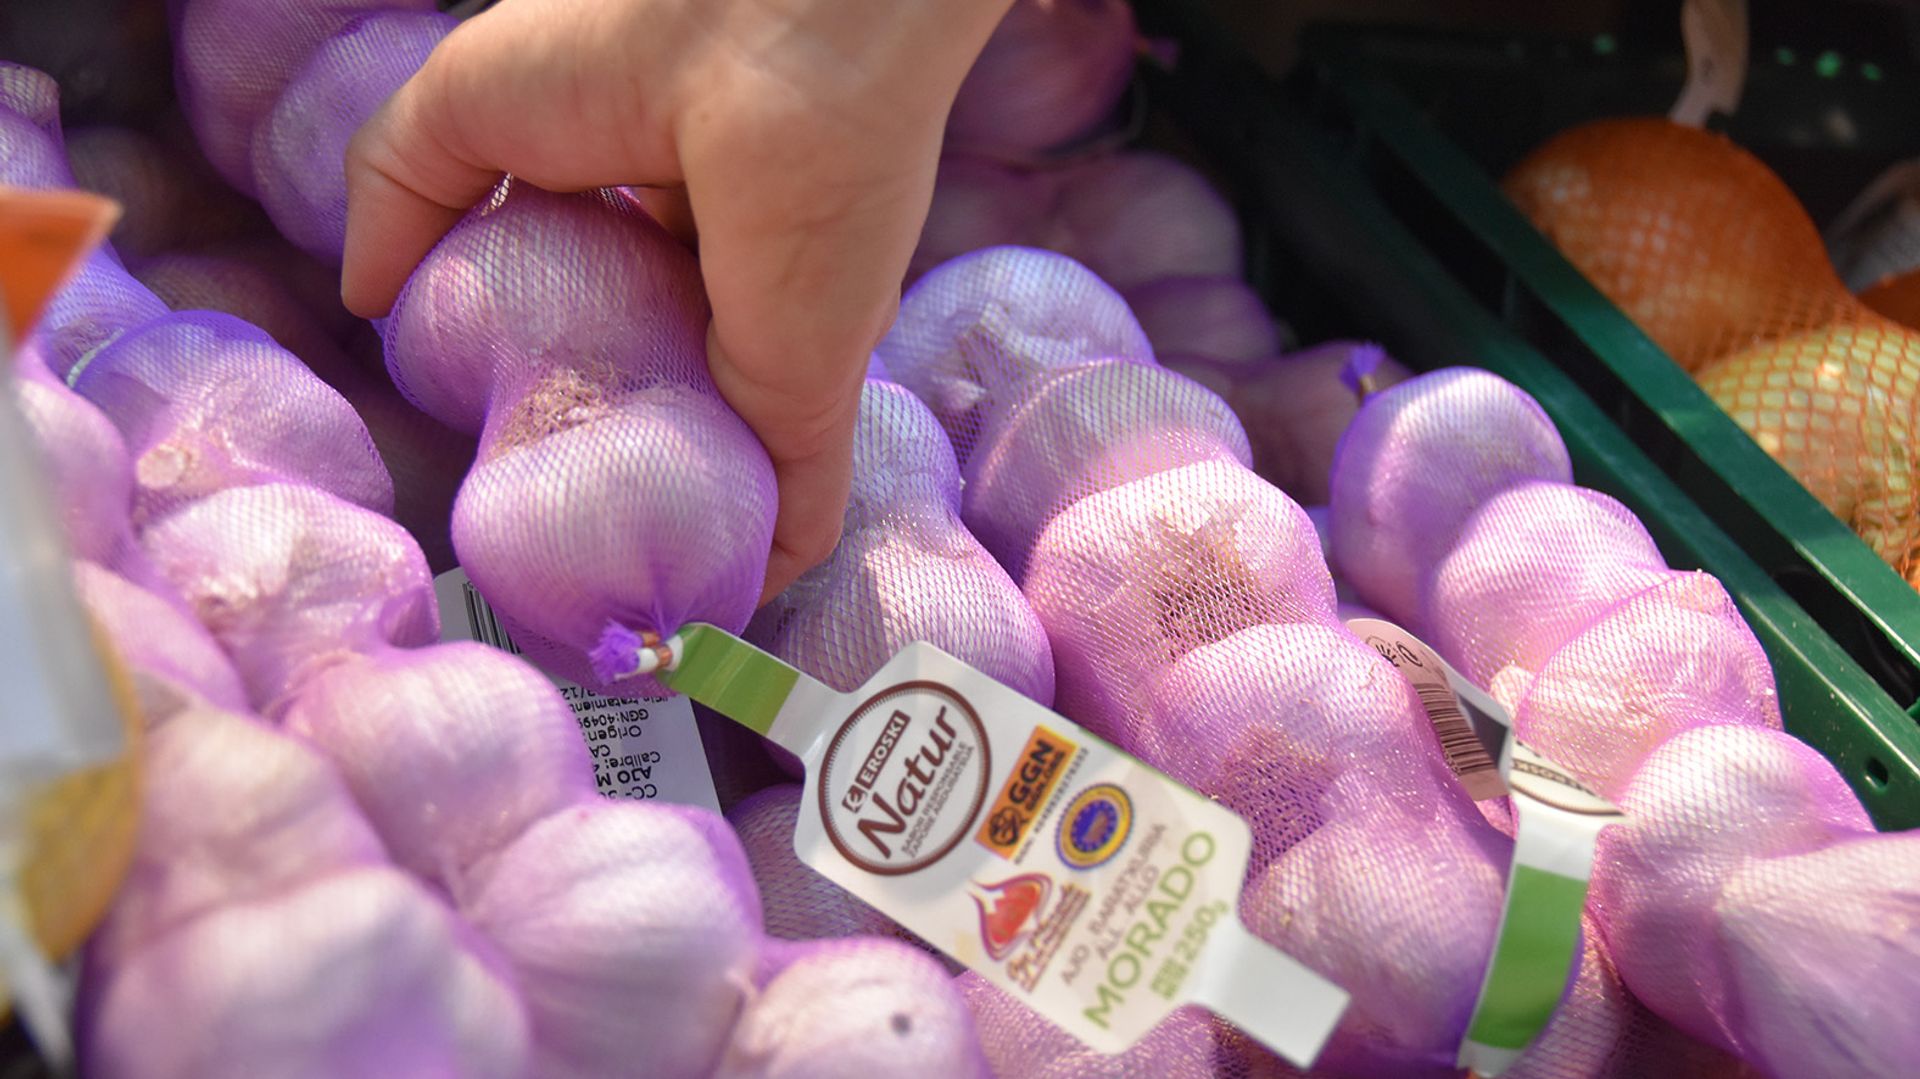 Image of garlic with the GGN label at a retailer store